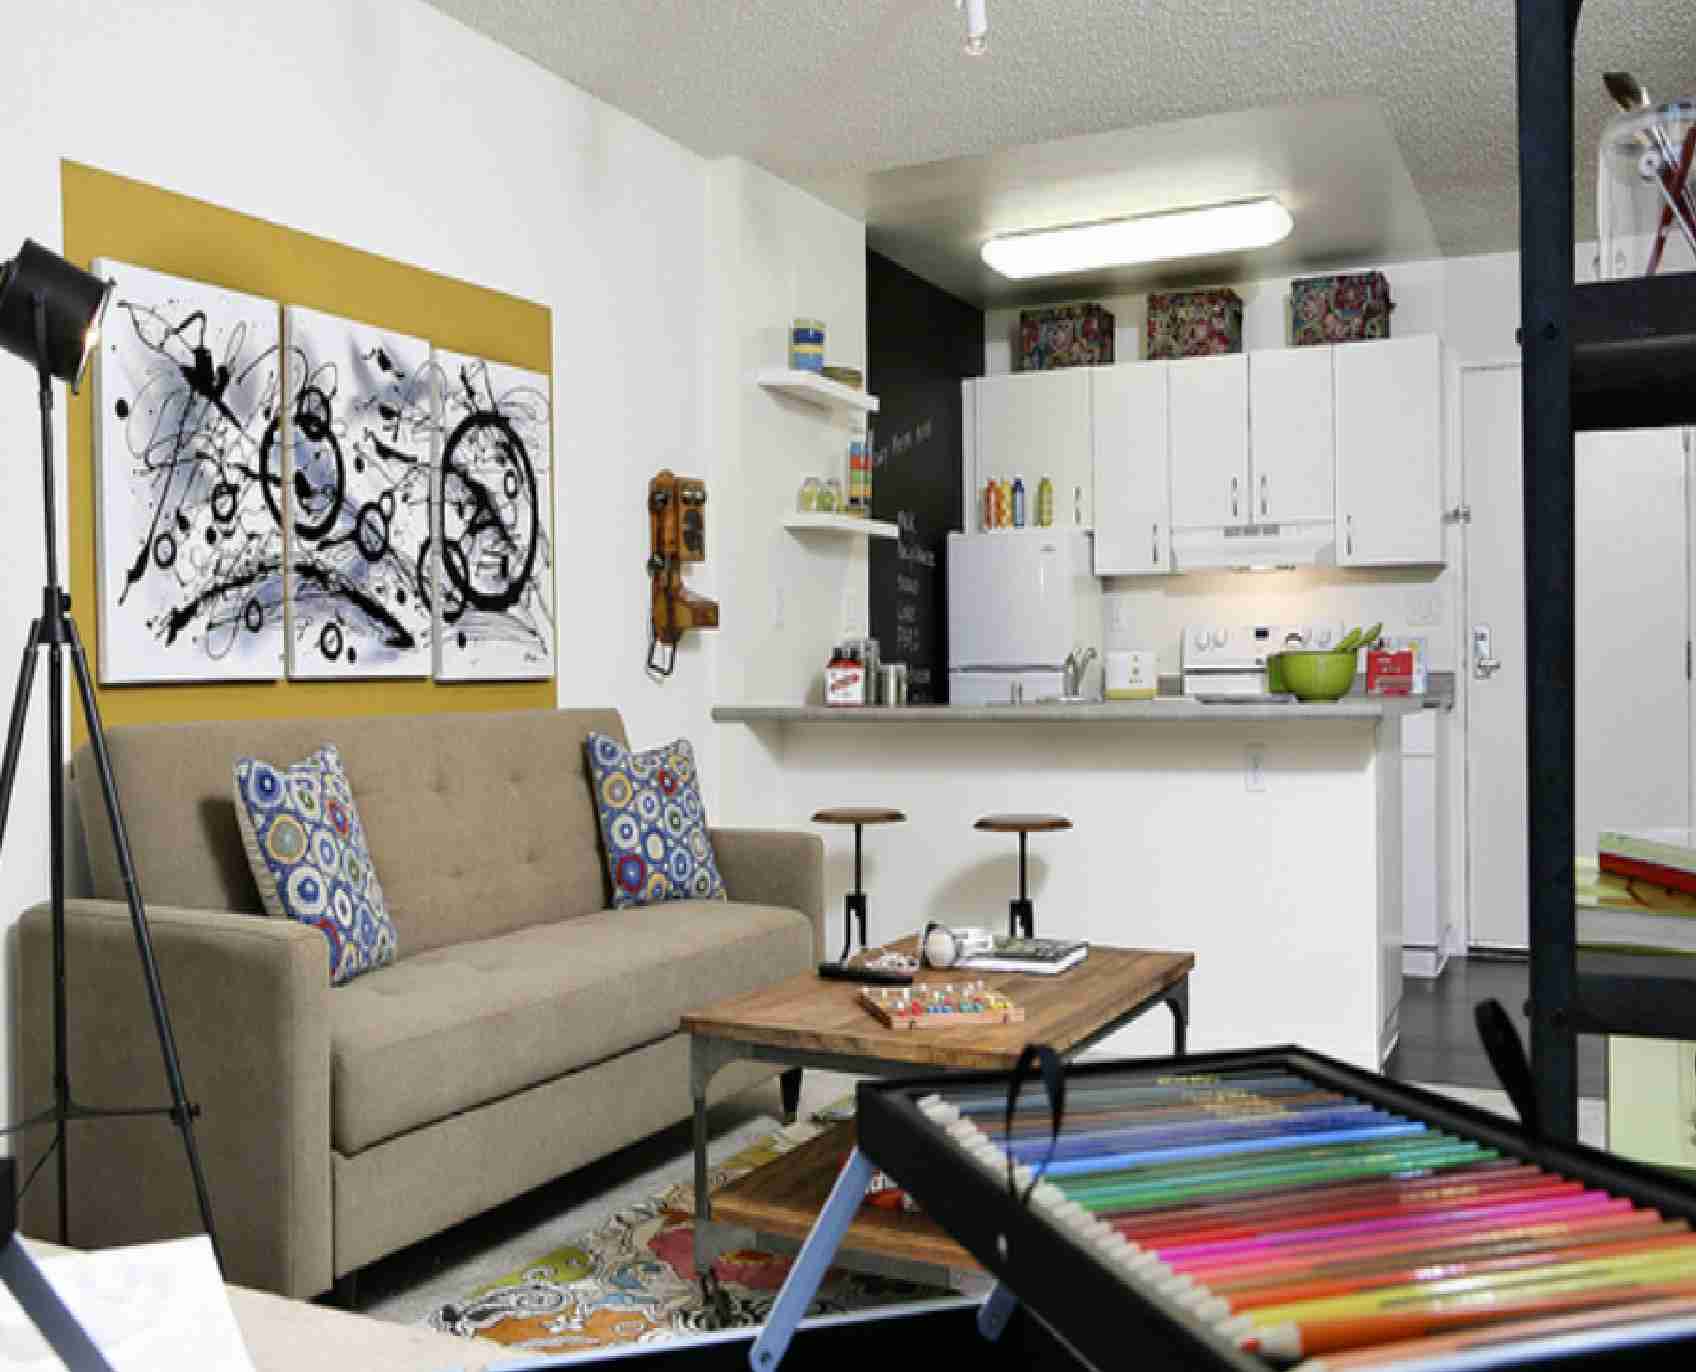 Home Decorating Ideas For Small Spaces